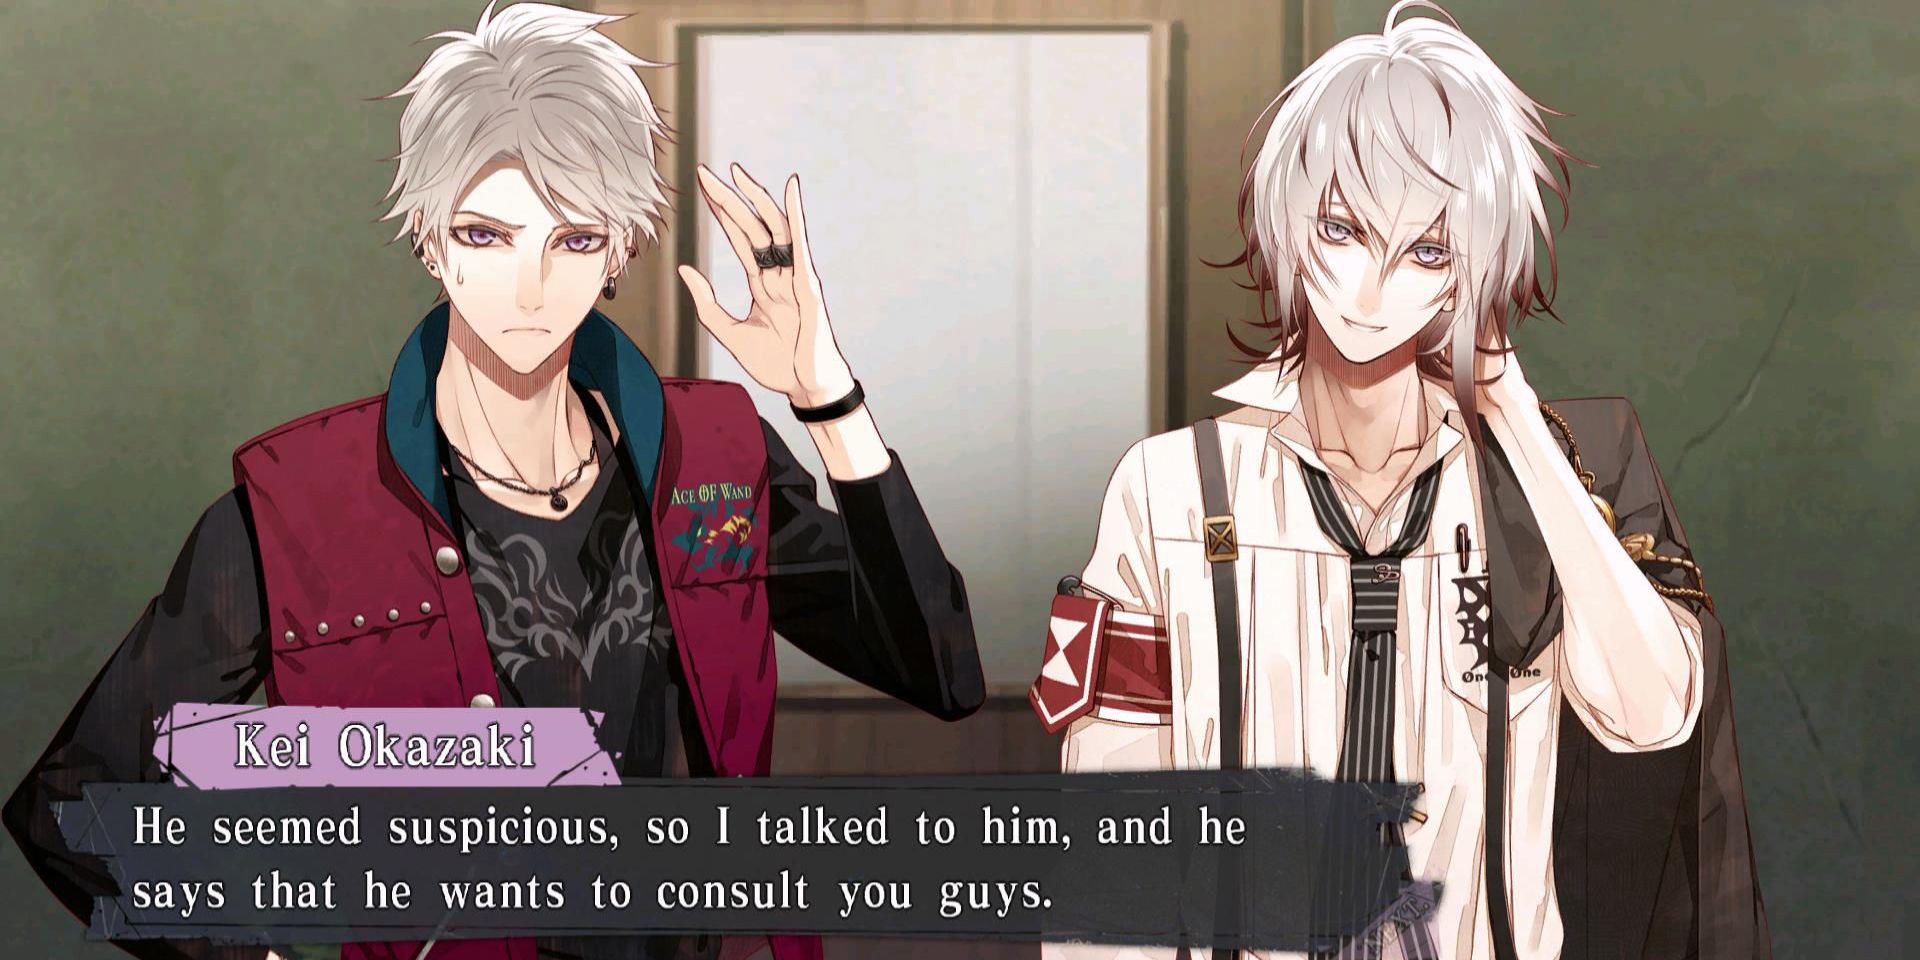 The player speaks to Kei and Ichika in Collar X Malice.